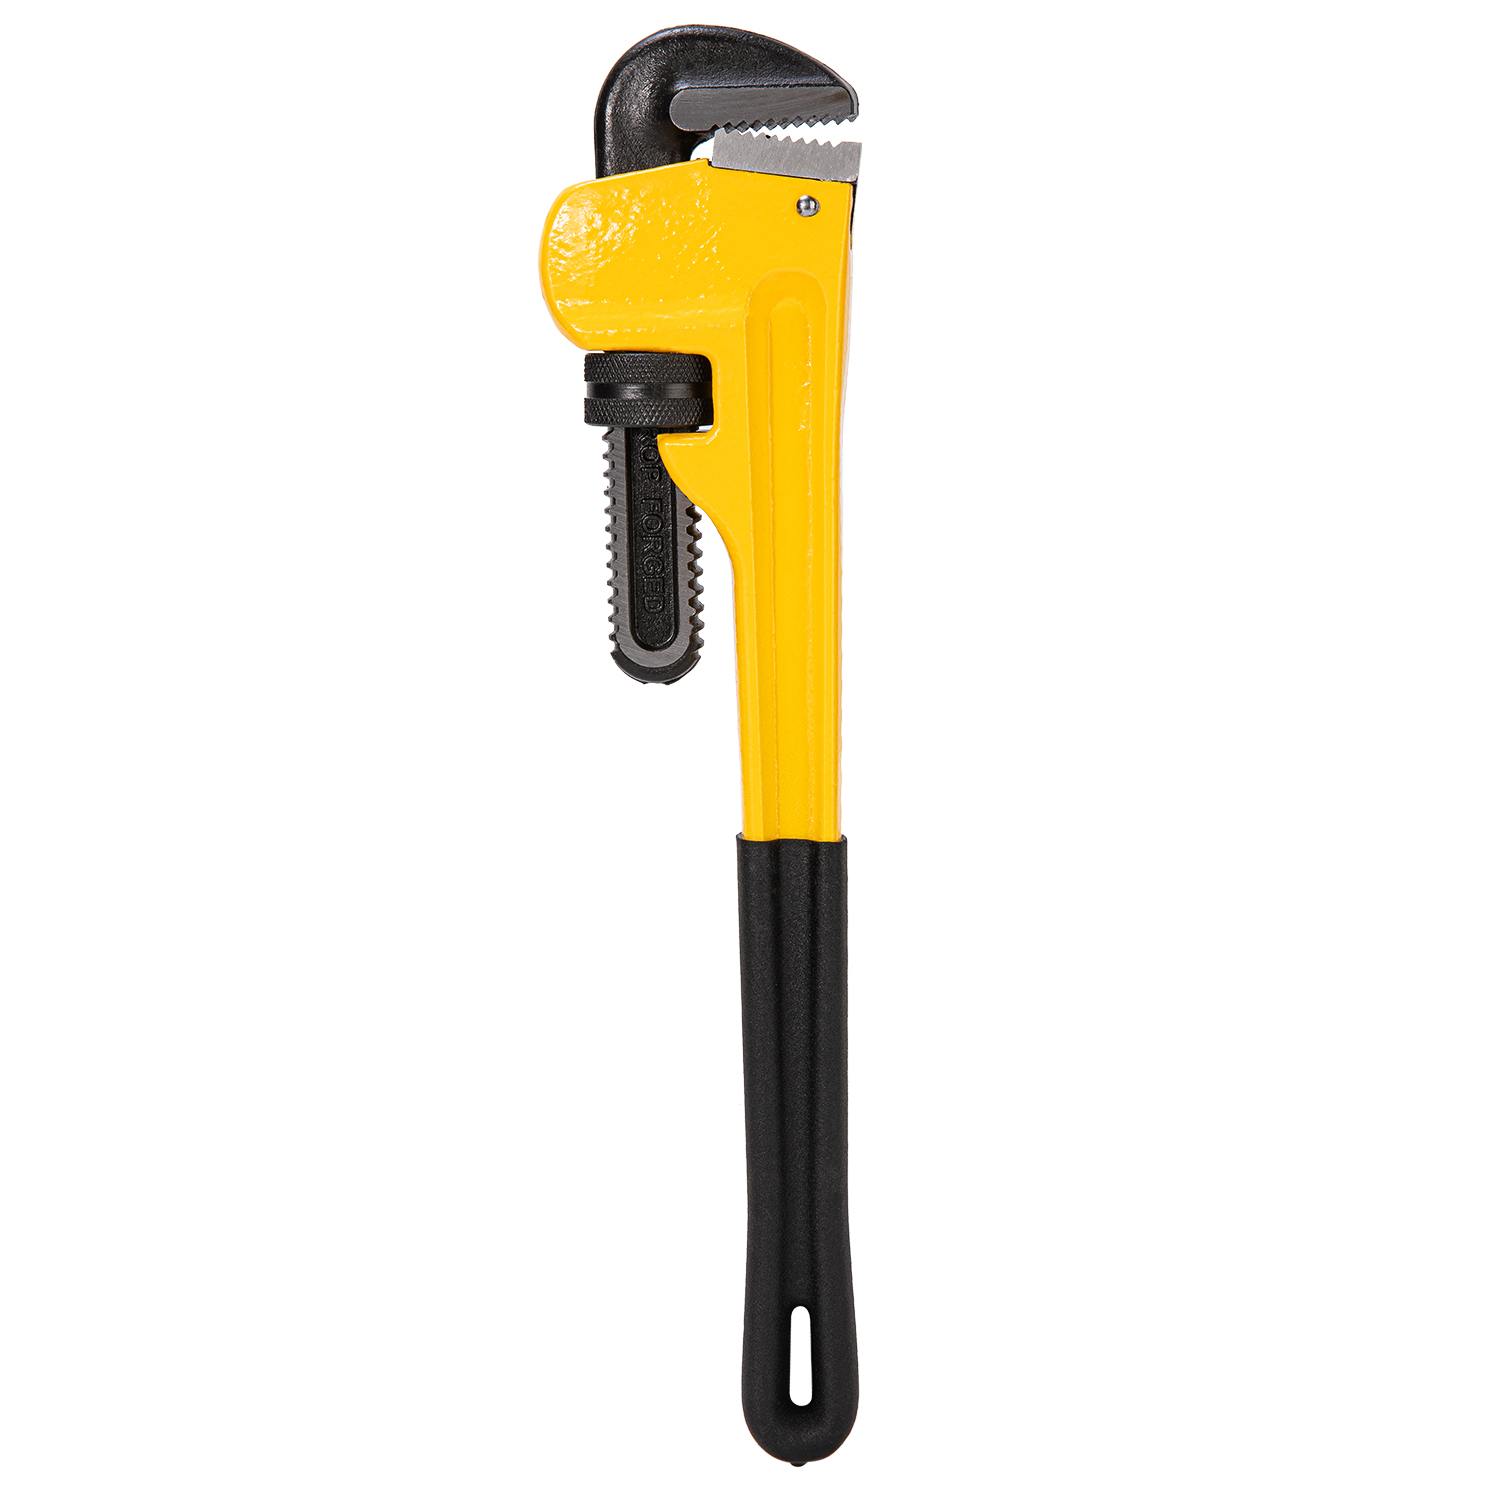 Adjustable Pipe Wrench with smooth jaws for plumbing